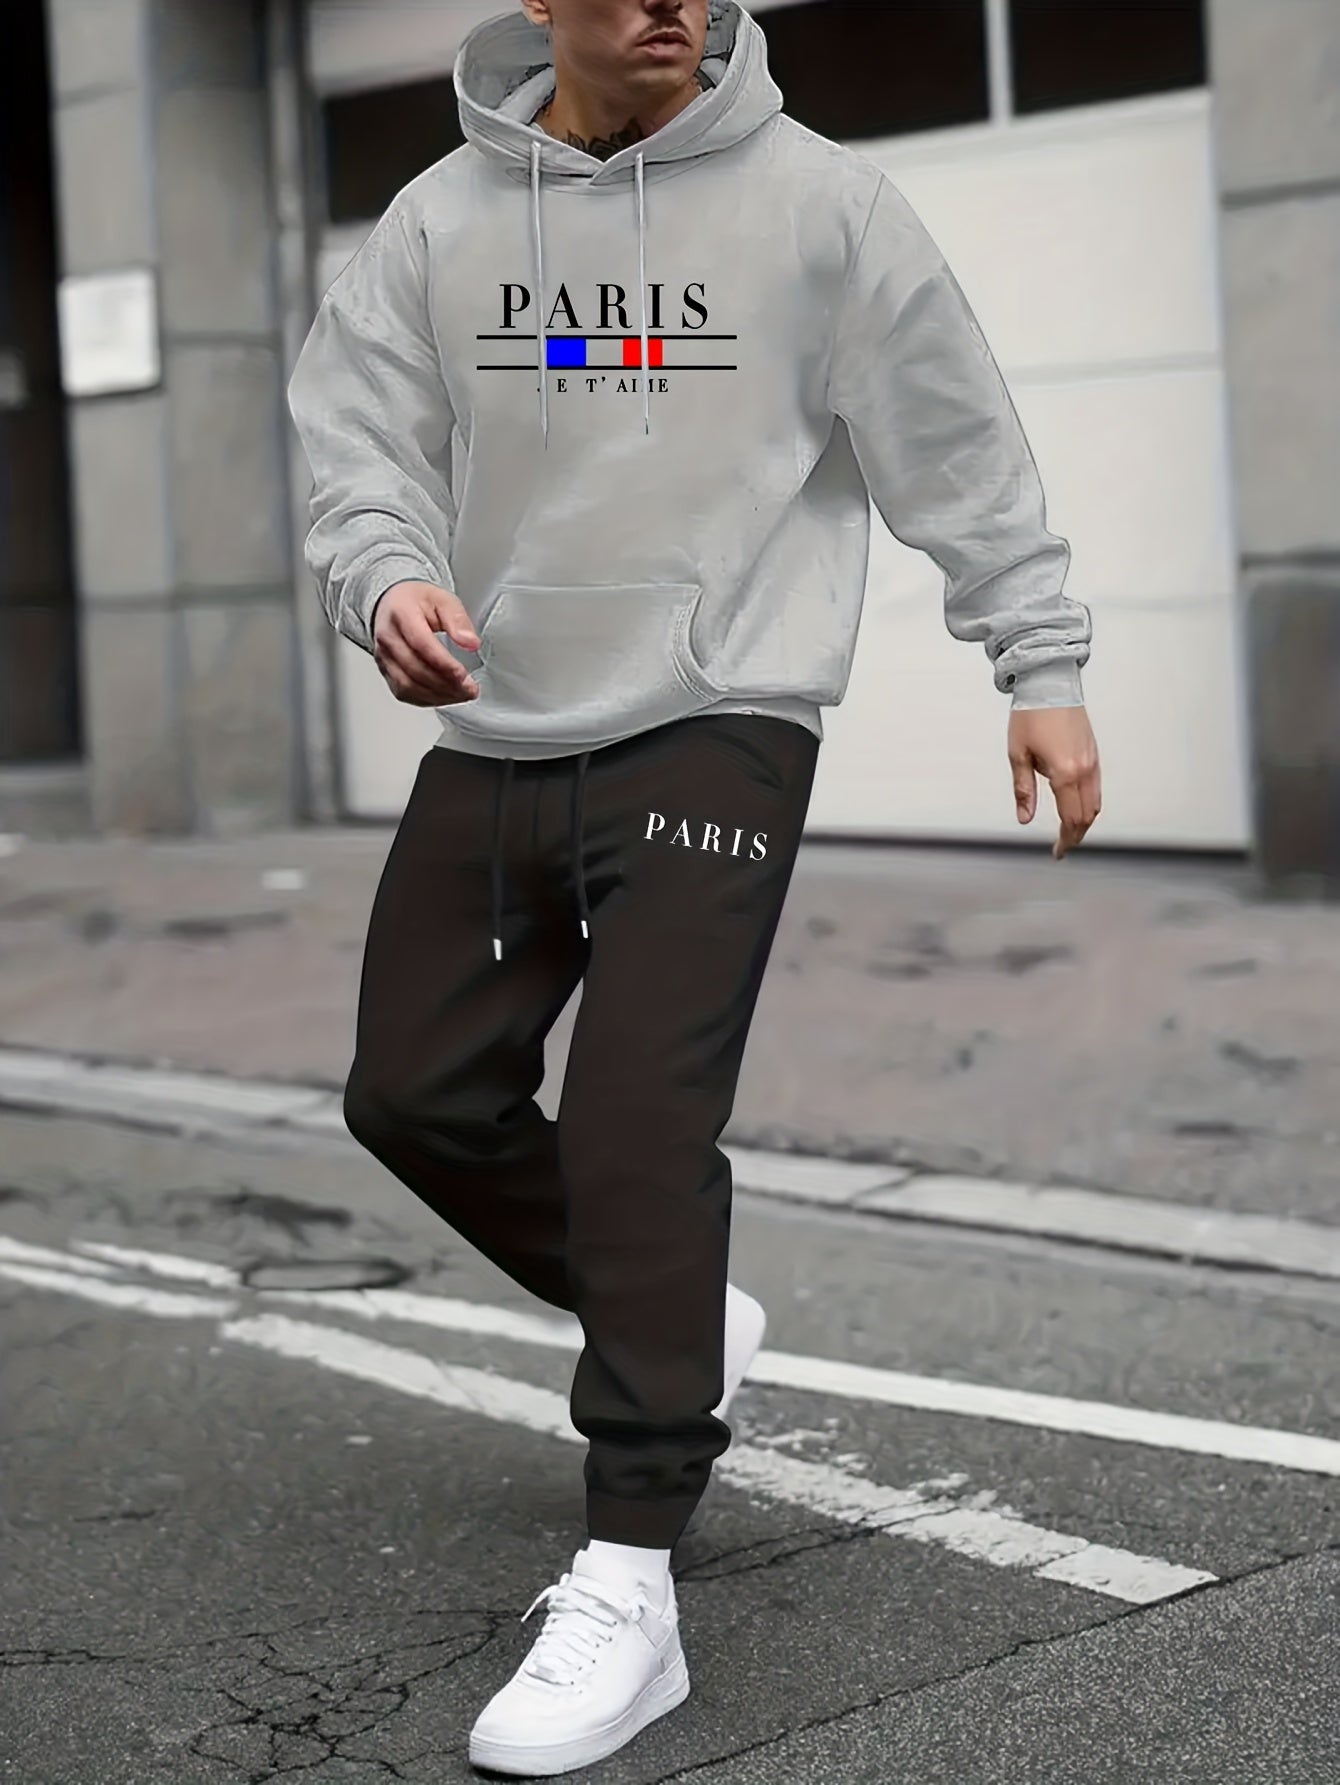 PARIS Print, Men's 2Pcs Outfits, Casual Hoodies Long Sleeve Pullover Hooded Sweatshirt And Sweatpants Joggers Set For Spring Fall, Men's Clothing